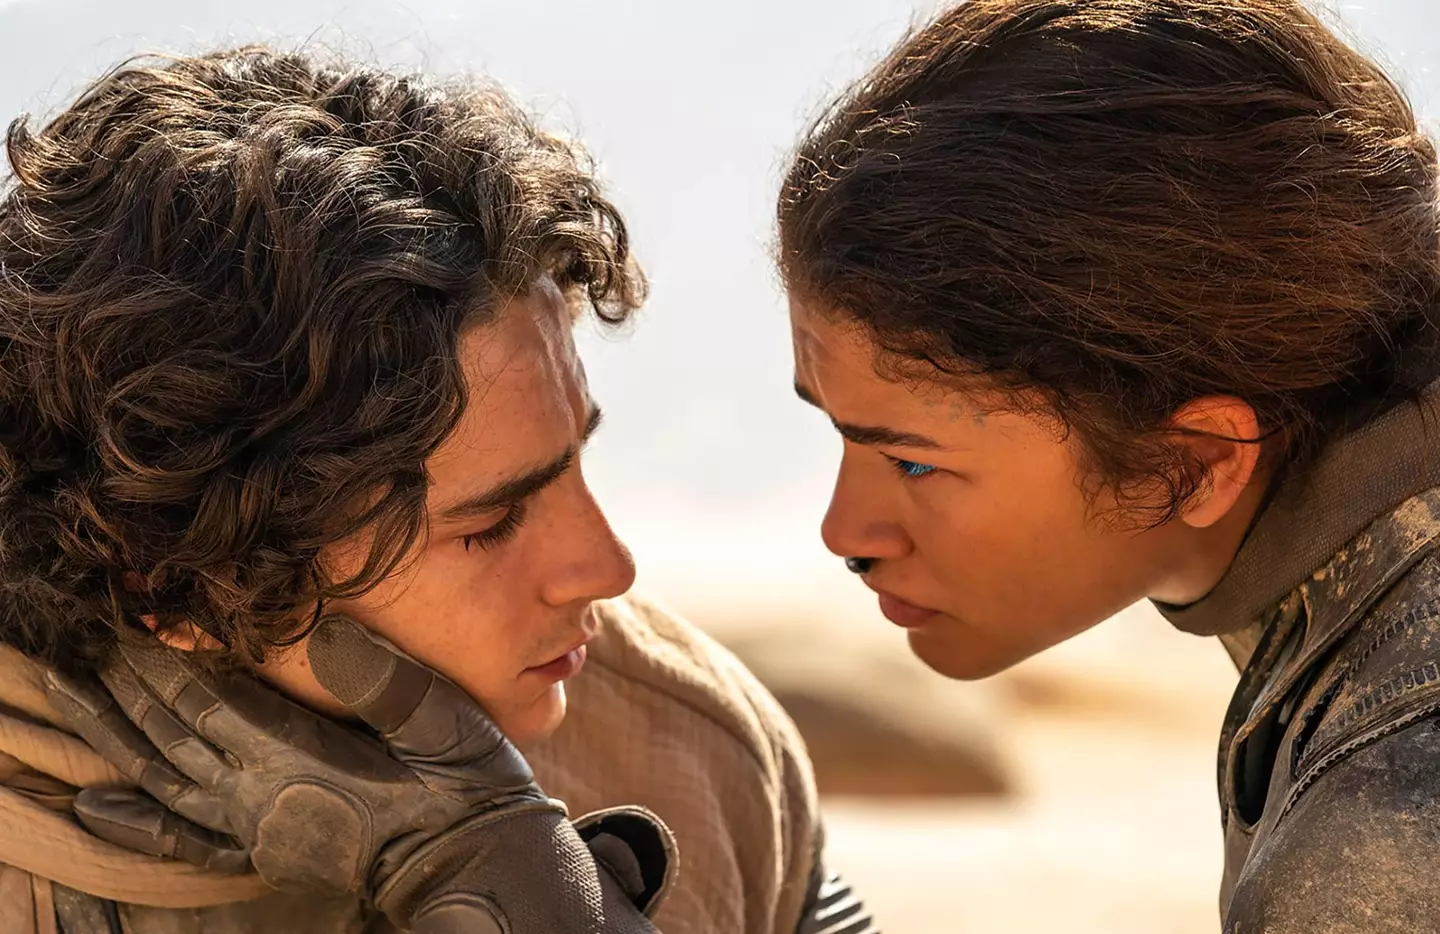 Timothée Chalamet and Zendaya will return to their starring roles.